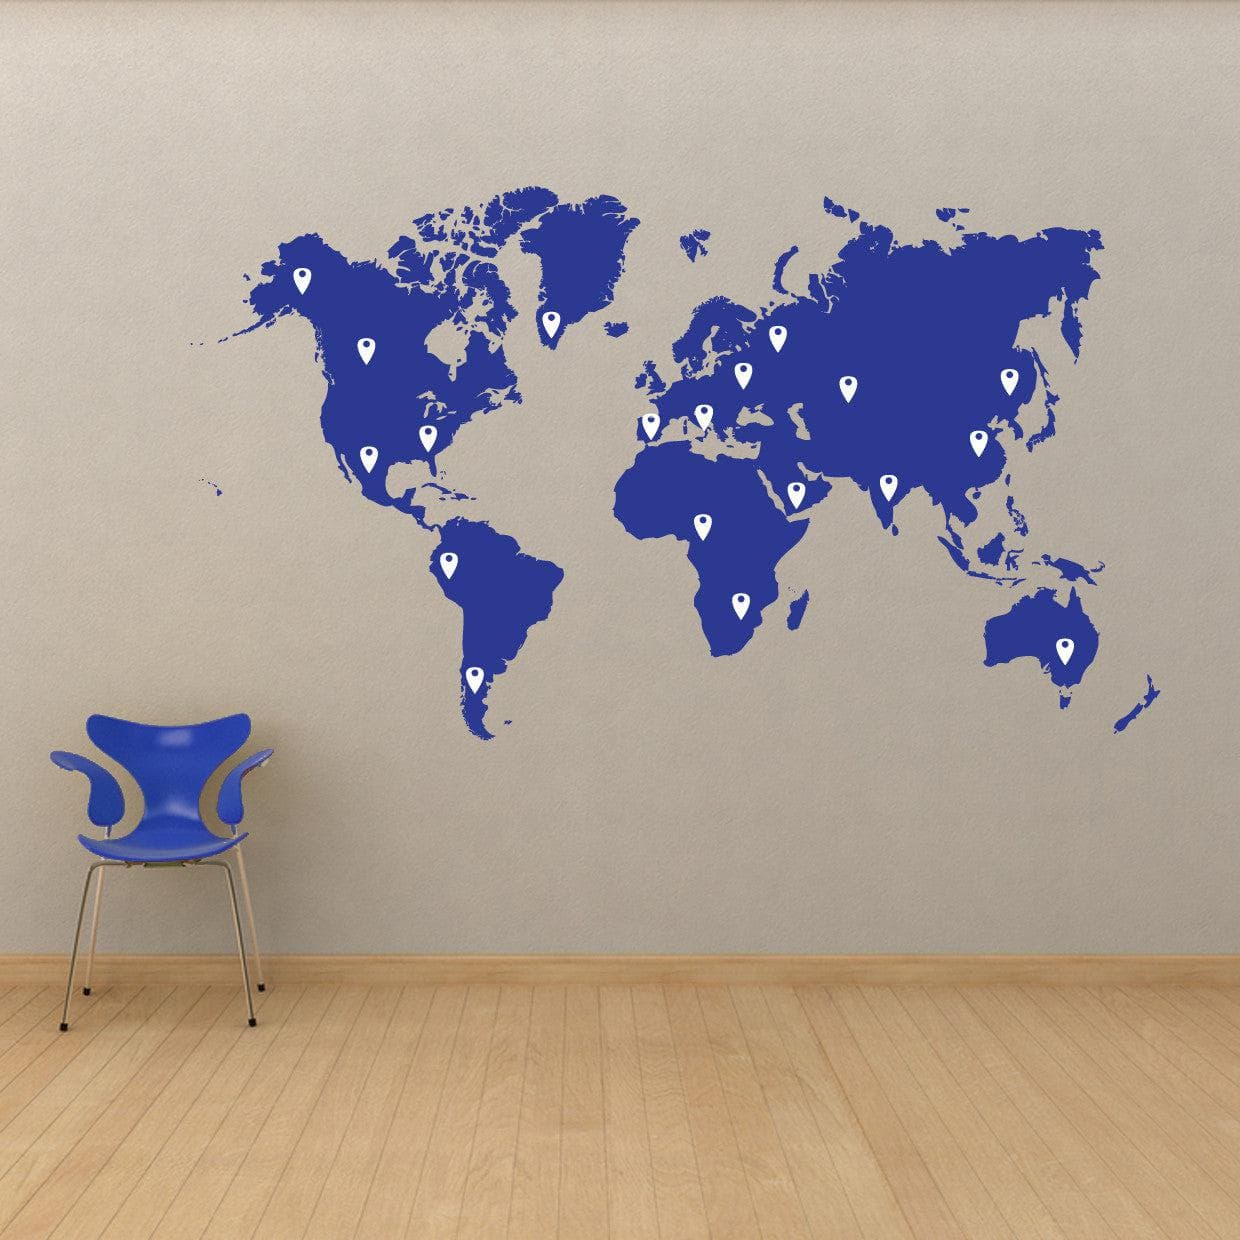 World Map Wall Decal Sticker With Location Pin Drops. #873